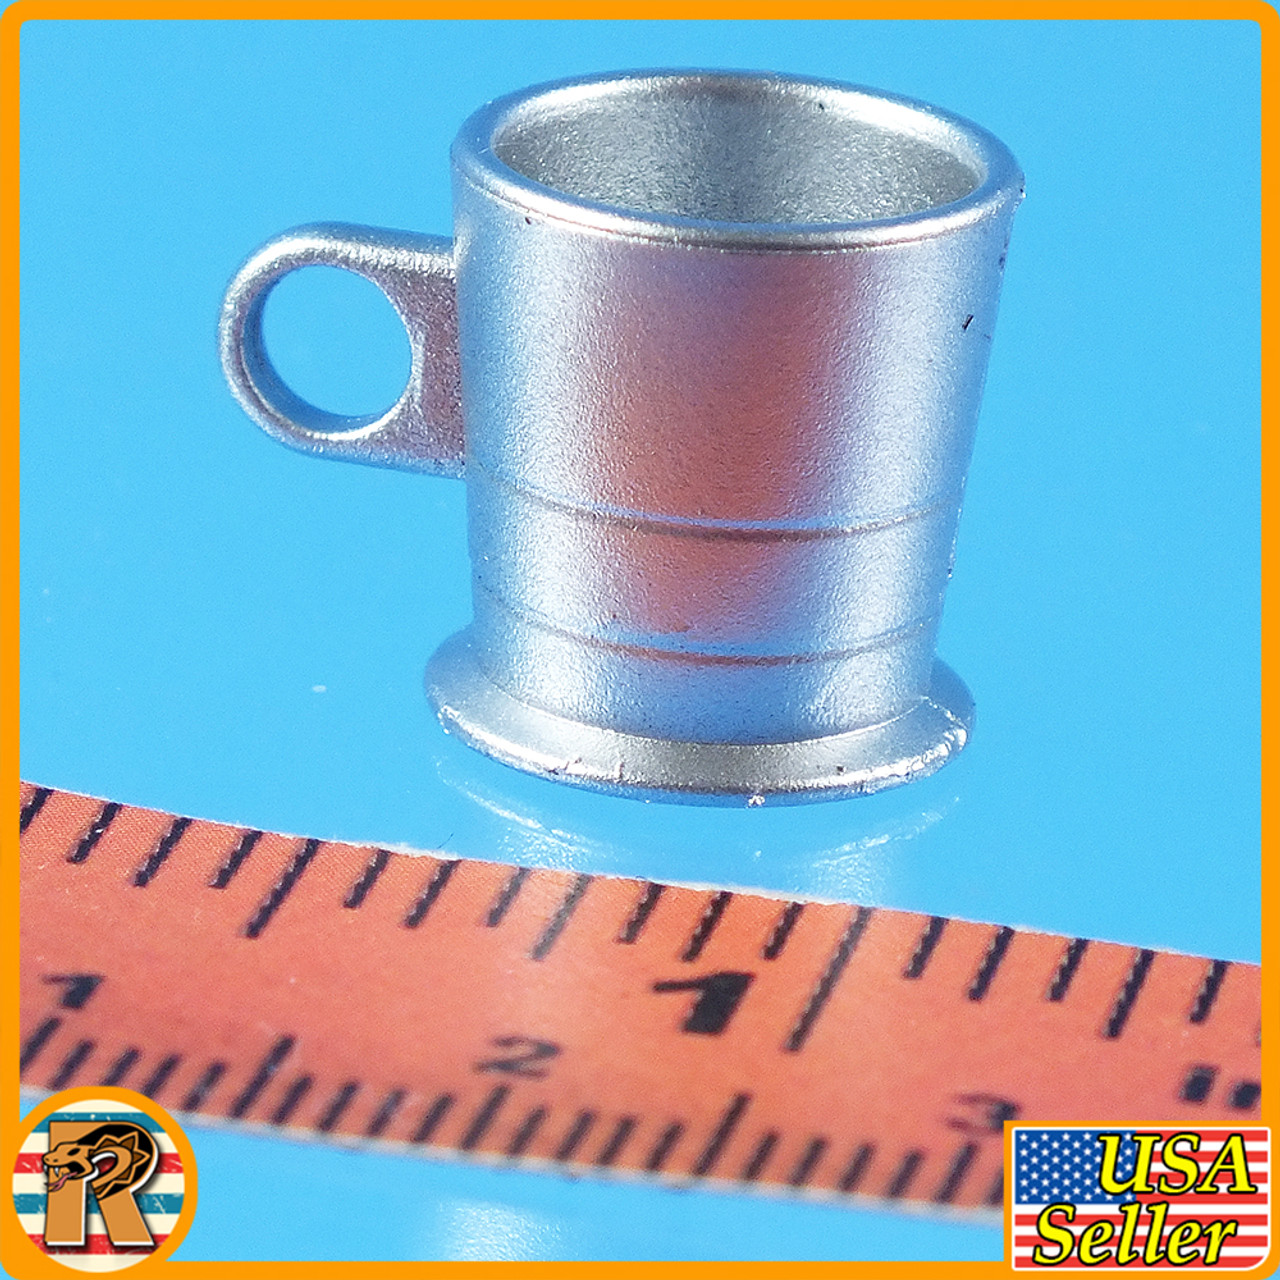 Cowboy Doc V4 - Silver Cup (Plastic) - 1/6 Scale -